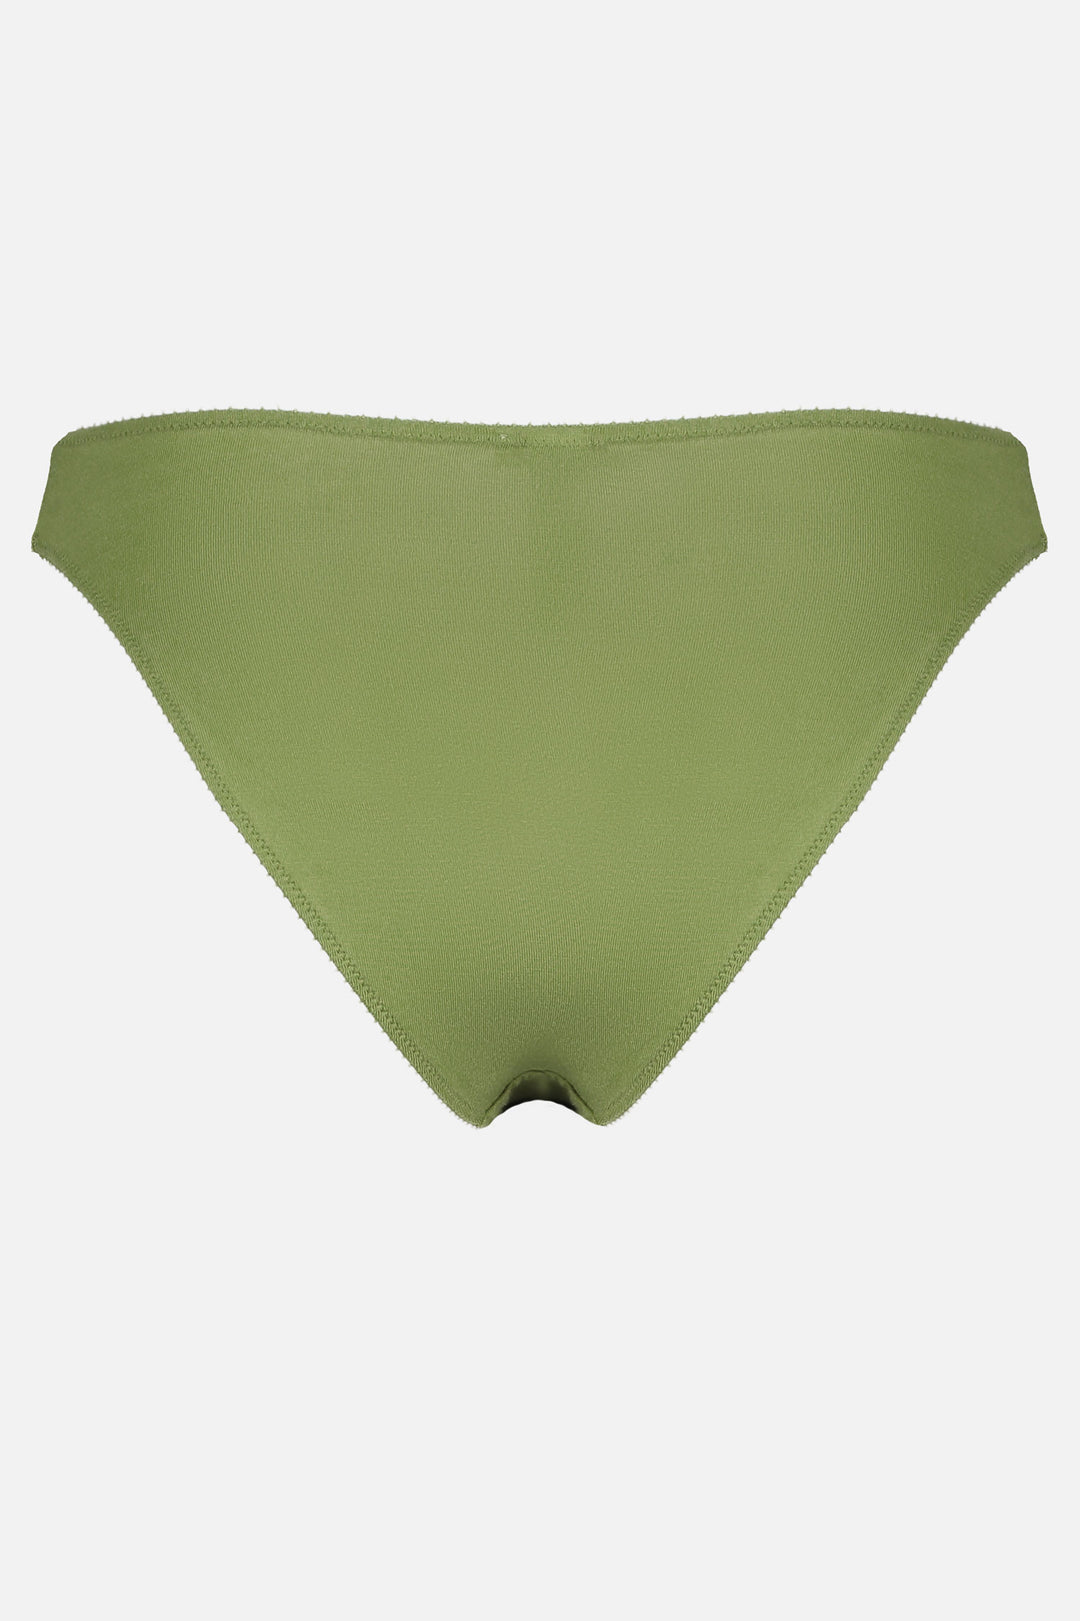 Videris Lingerie bikini knicker in olive TENCEL™  mid-rise style with cheeky bottom coverage and soft elastics